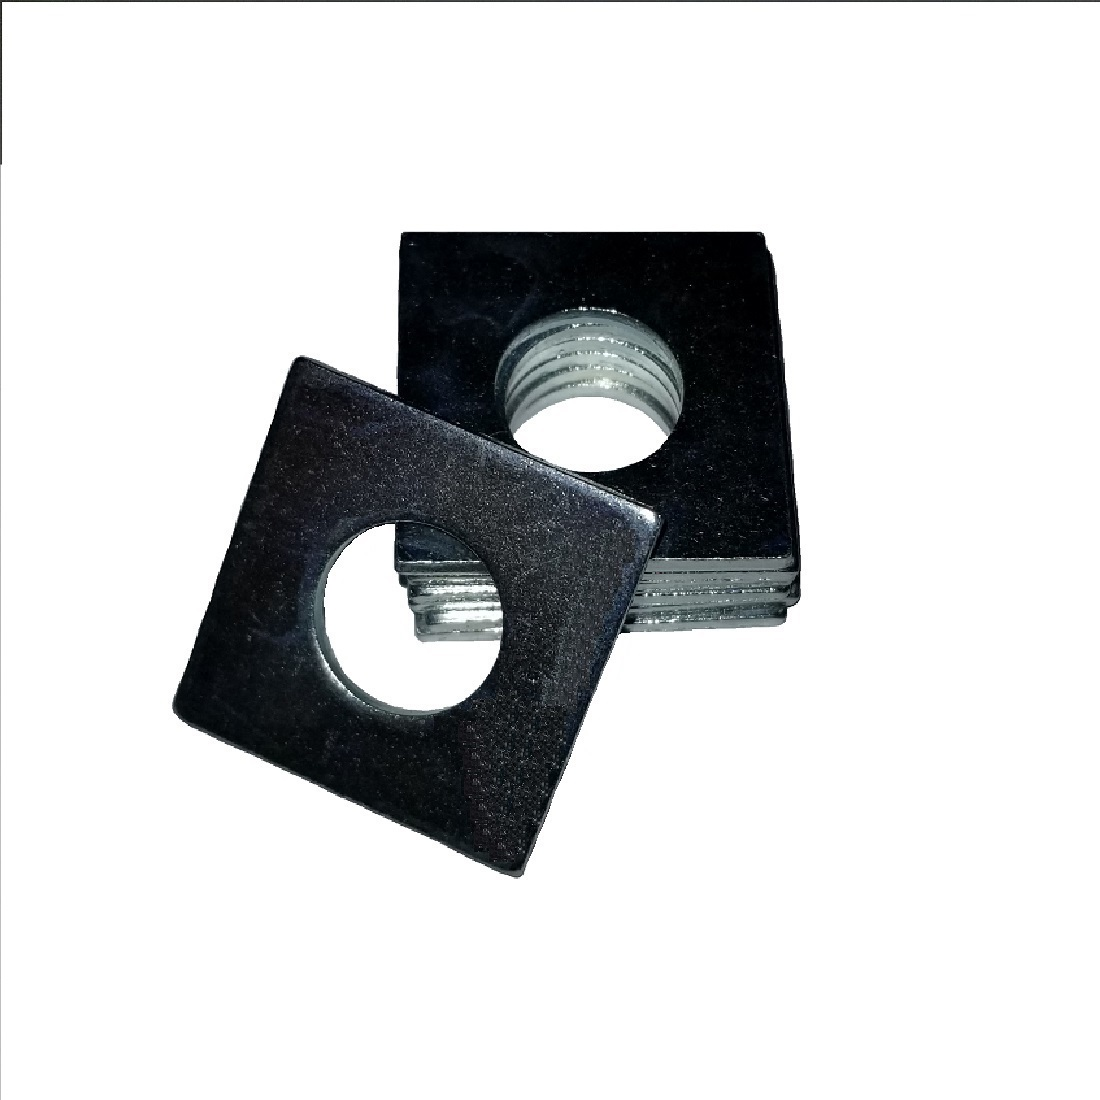 Square OD Washer - 0.562 ID, 1.250 OD, 0.118 Thick, Low Carbon Steel - Soft, Zinc & Clear